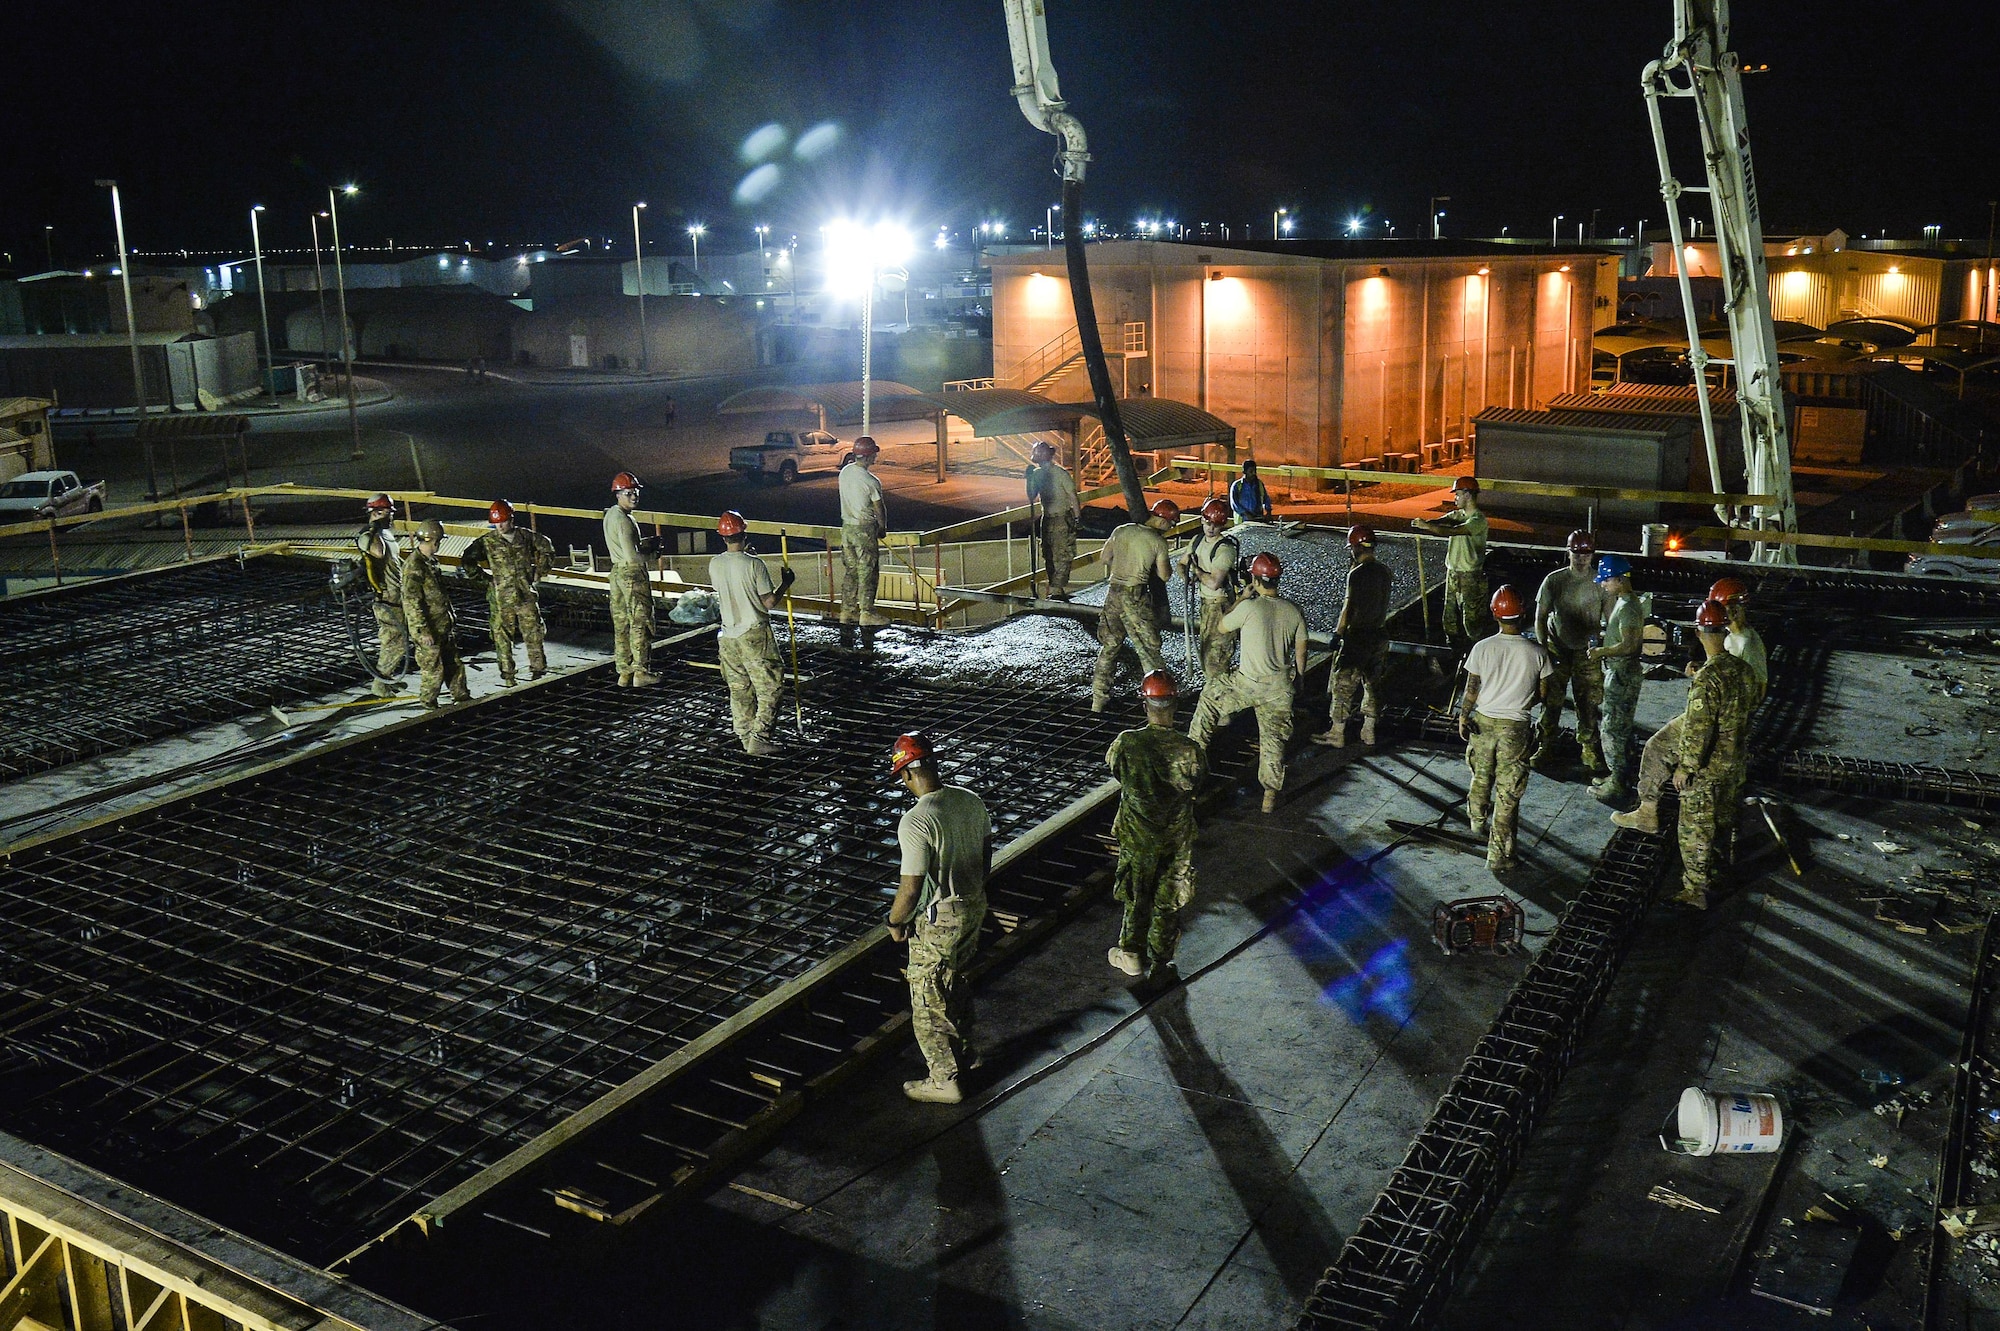 Airmen assigned to the 557th Expeditionary RED HORSE Squadron pour concrete roof on a structure at an undisclosed location in Southwest Asia July 28, 2015. RED HORSE is a self-sustaining, mobile, heavy construction squadron capable of rapid response and independent operations in remote, high-threat environments worldwide. (U.S. Air Force photo/Tech. Sgt. Christopher Boitz)